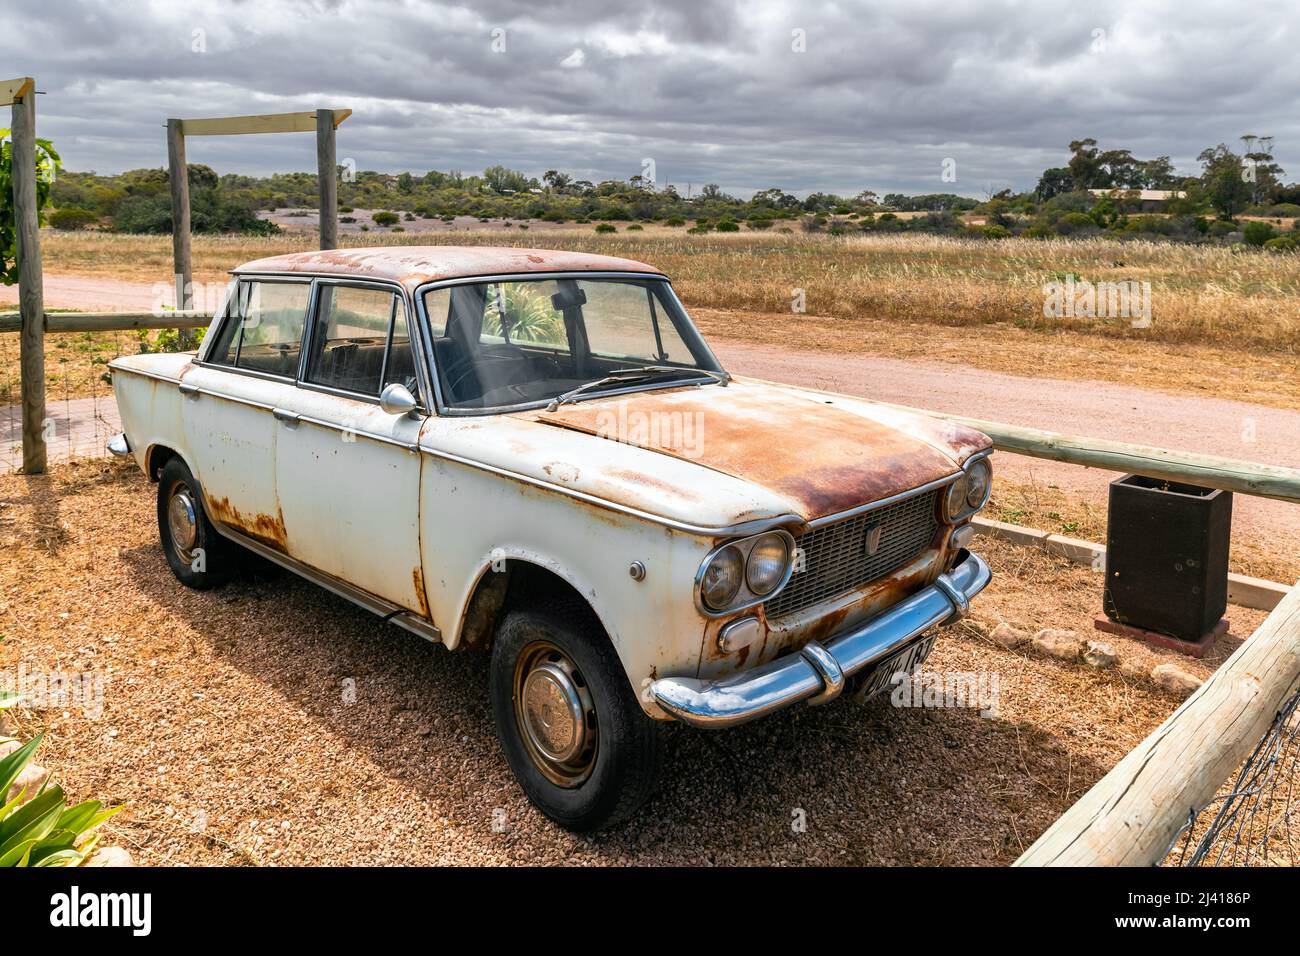 Moonta, South Australia - October 27, 2019: Old rusty Fiat 1500 parked near the farm in Australian outback on a bright day Stock Photo